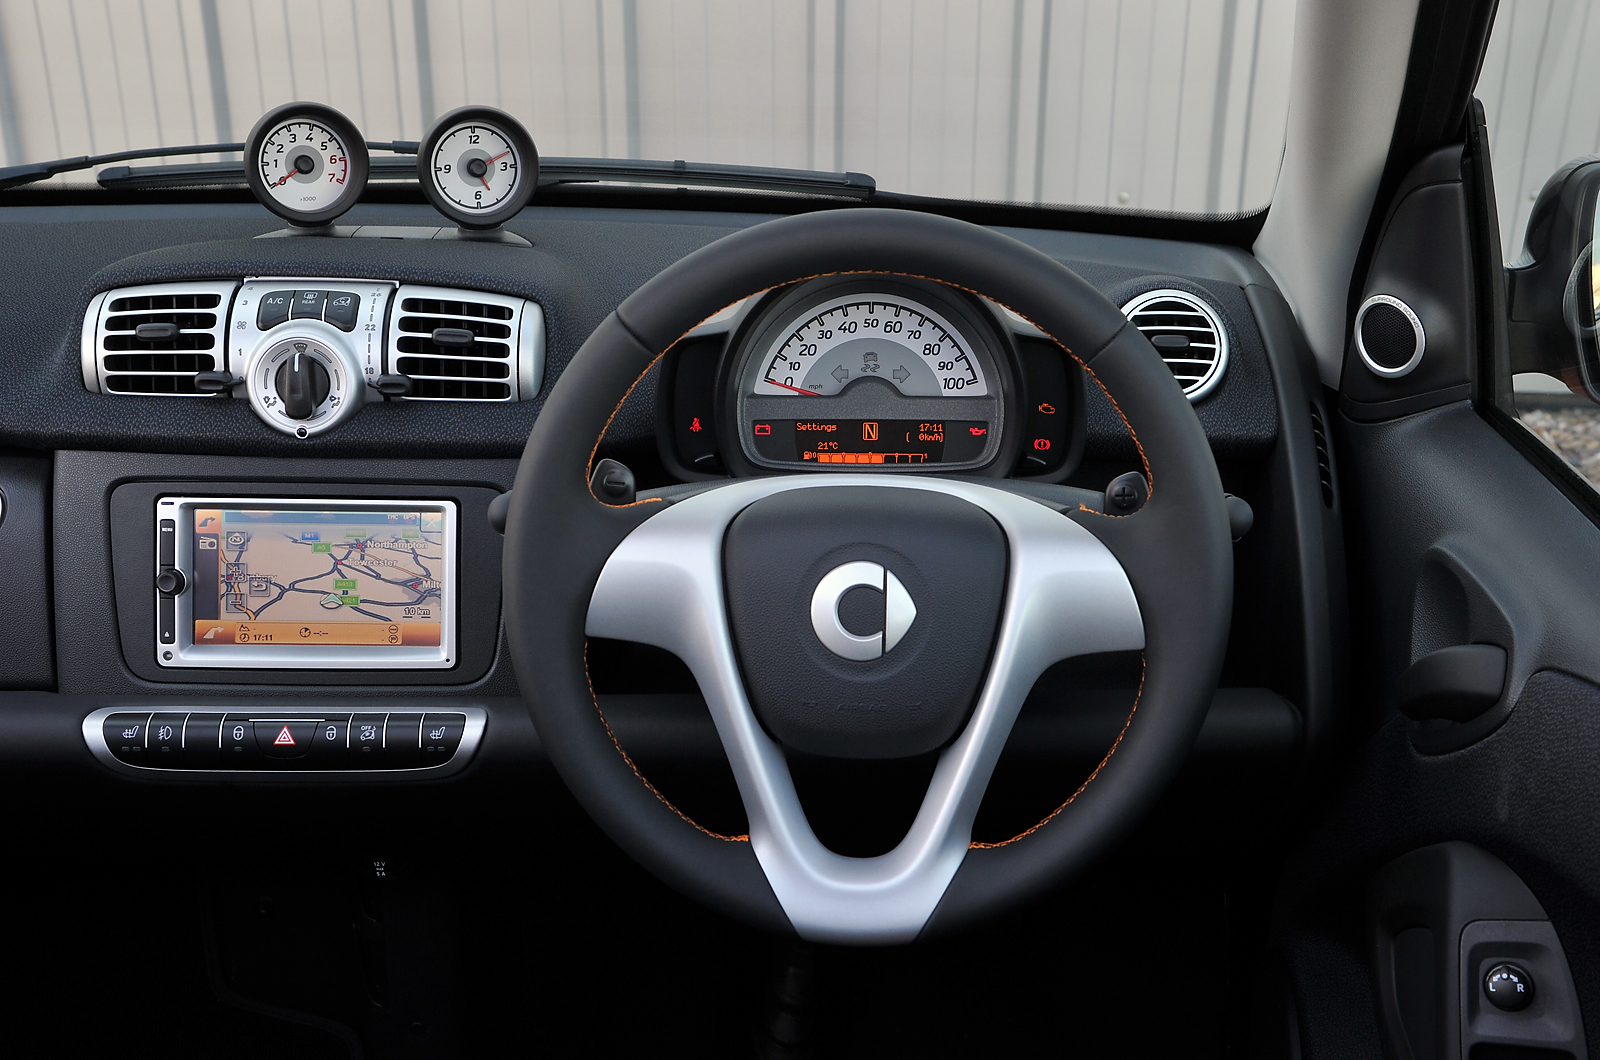 Smart Fortwo dashboard